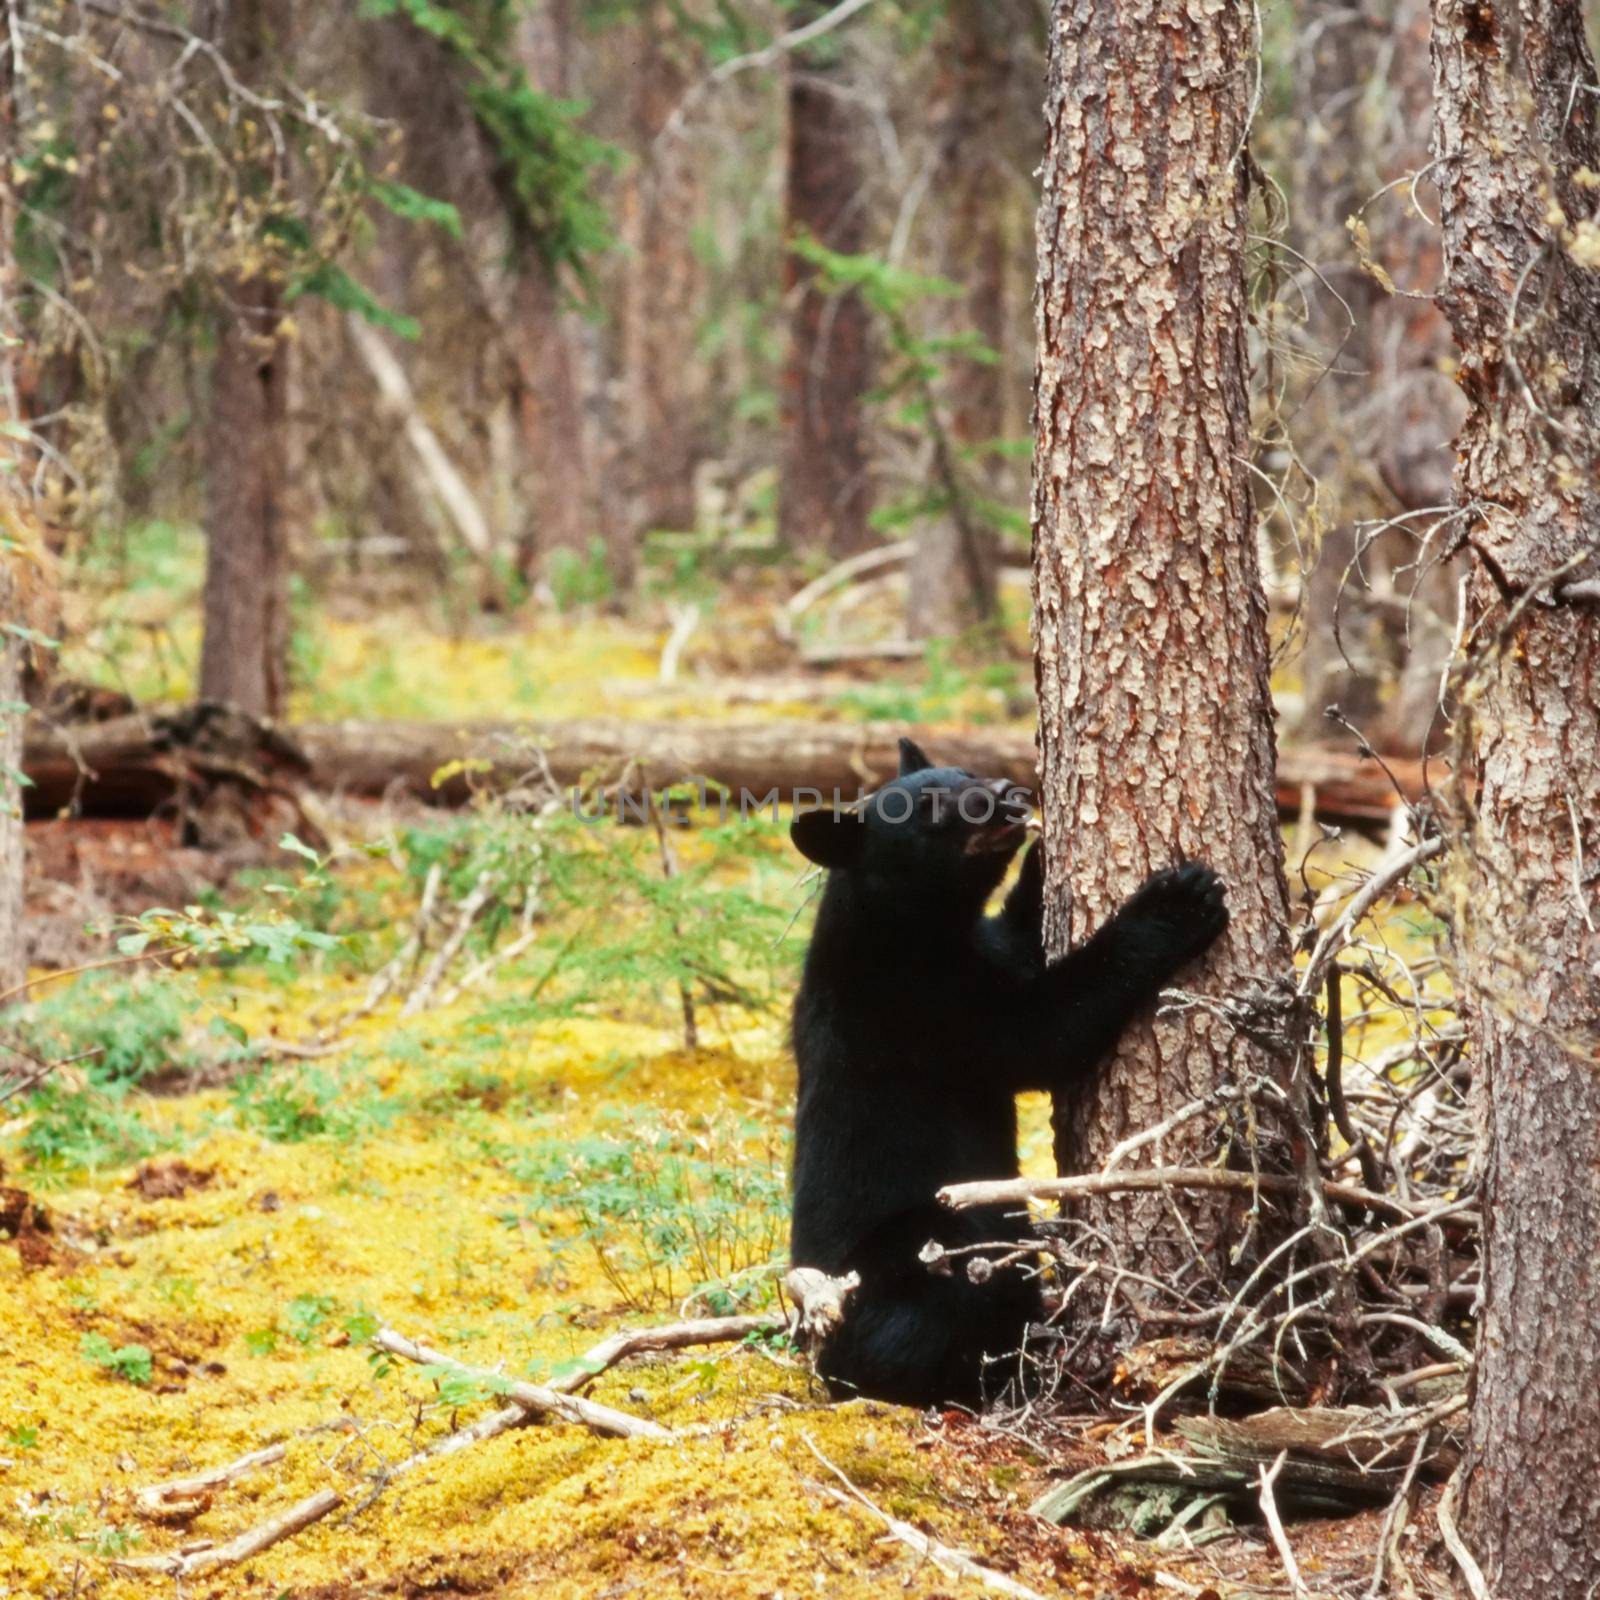 Young yearling Black Bear, Ursus americanus, sitting playful at tree trunk in Yukon Territory, Canada, boreal forest taiga